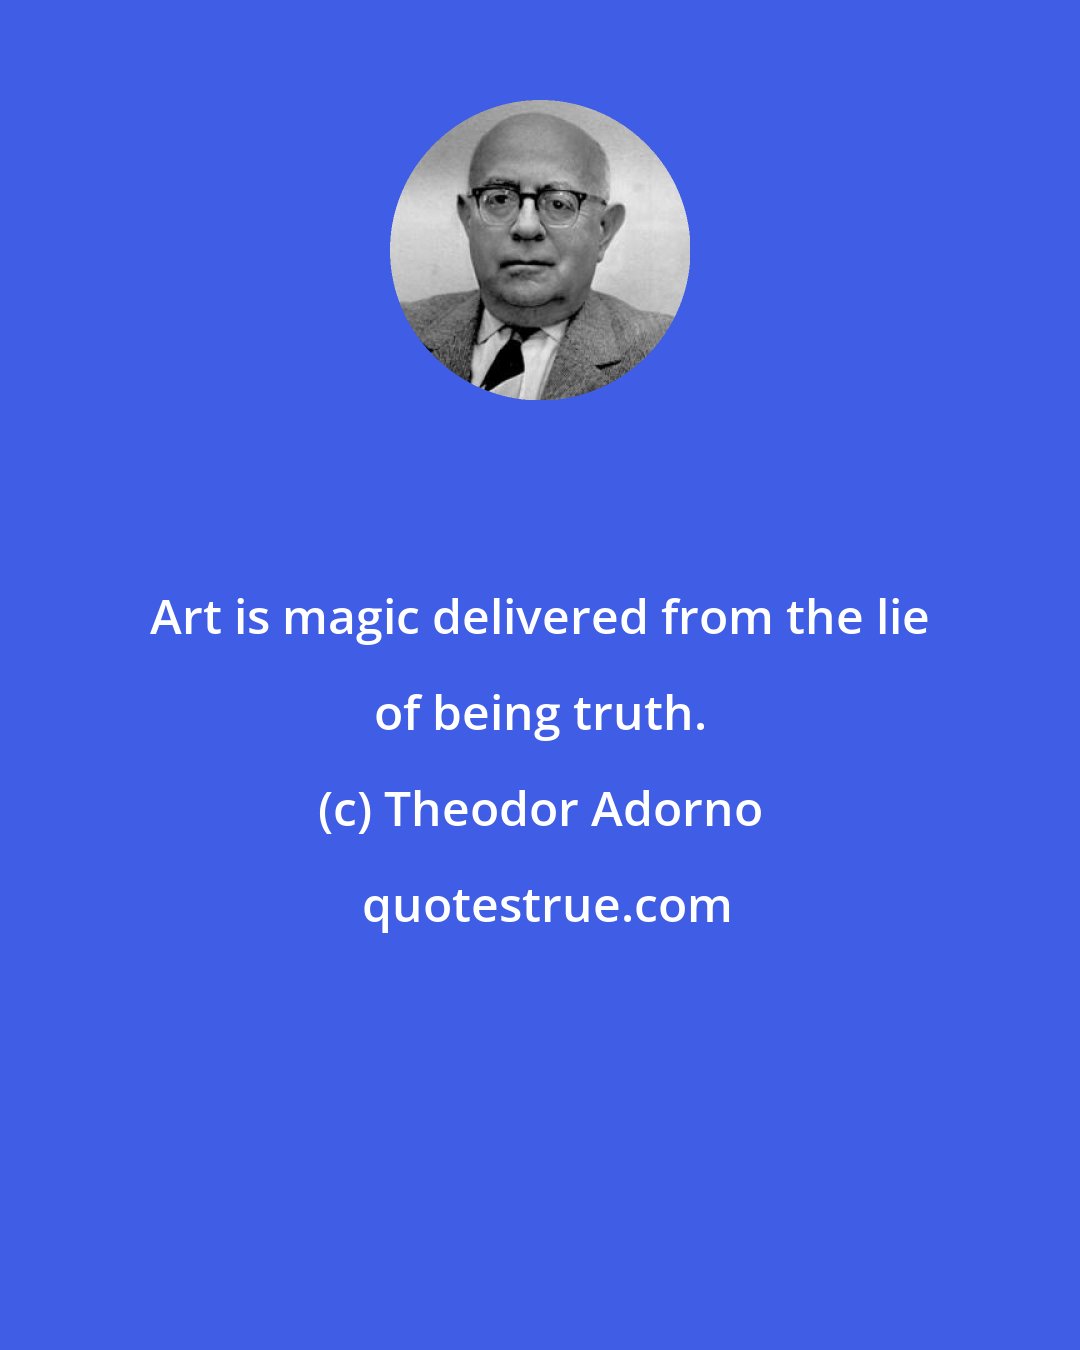 Theodor Adorno: Art is magic delivered from the lie of being truth.